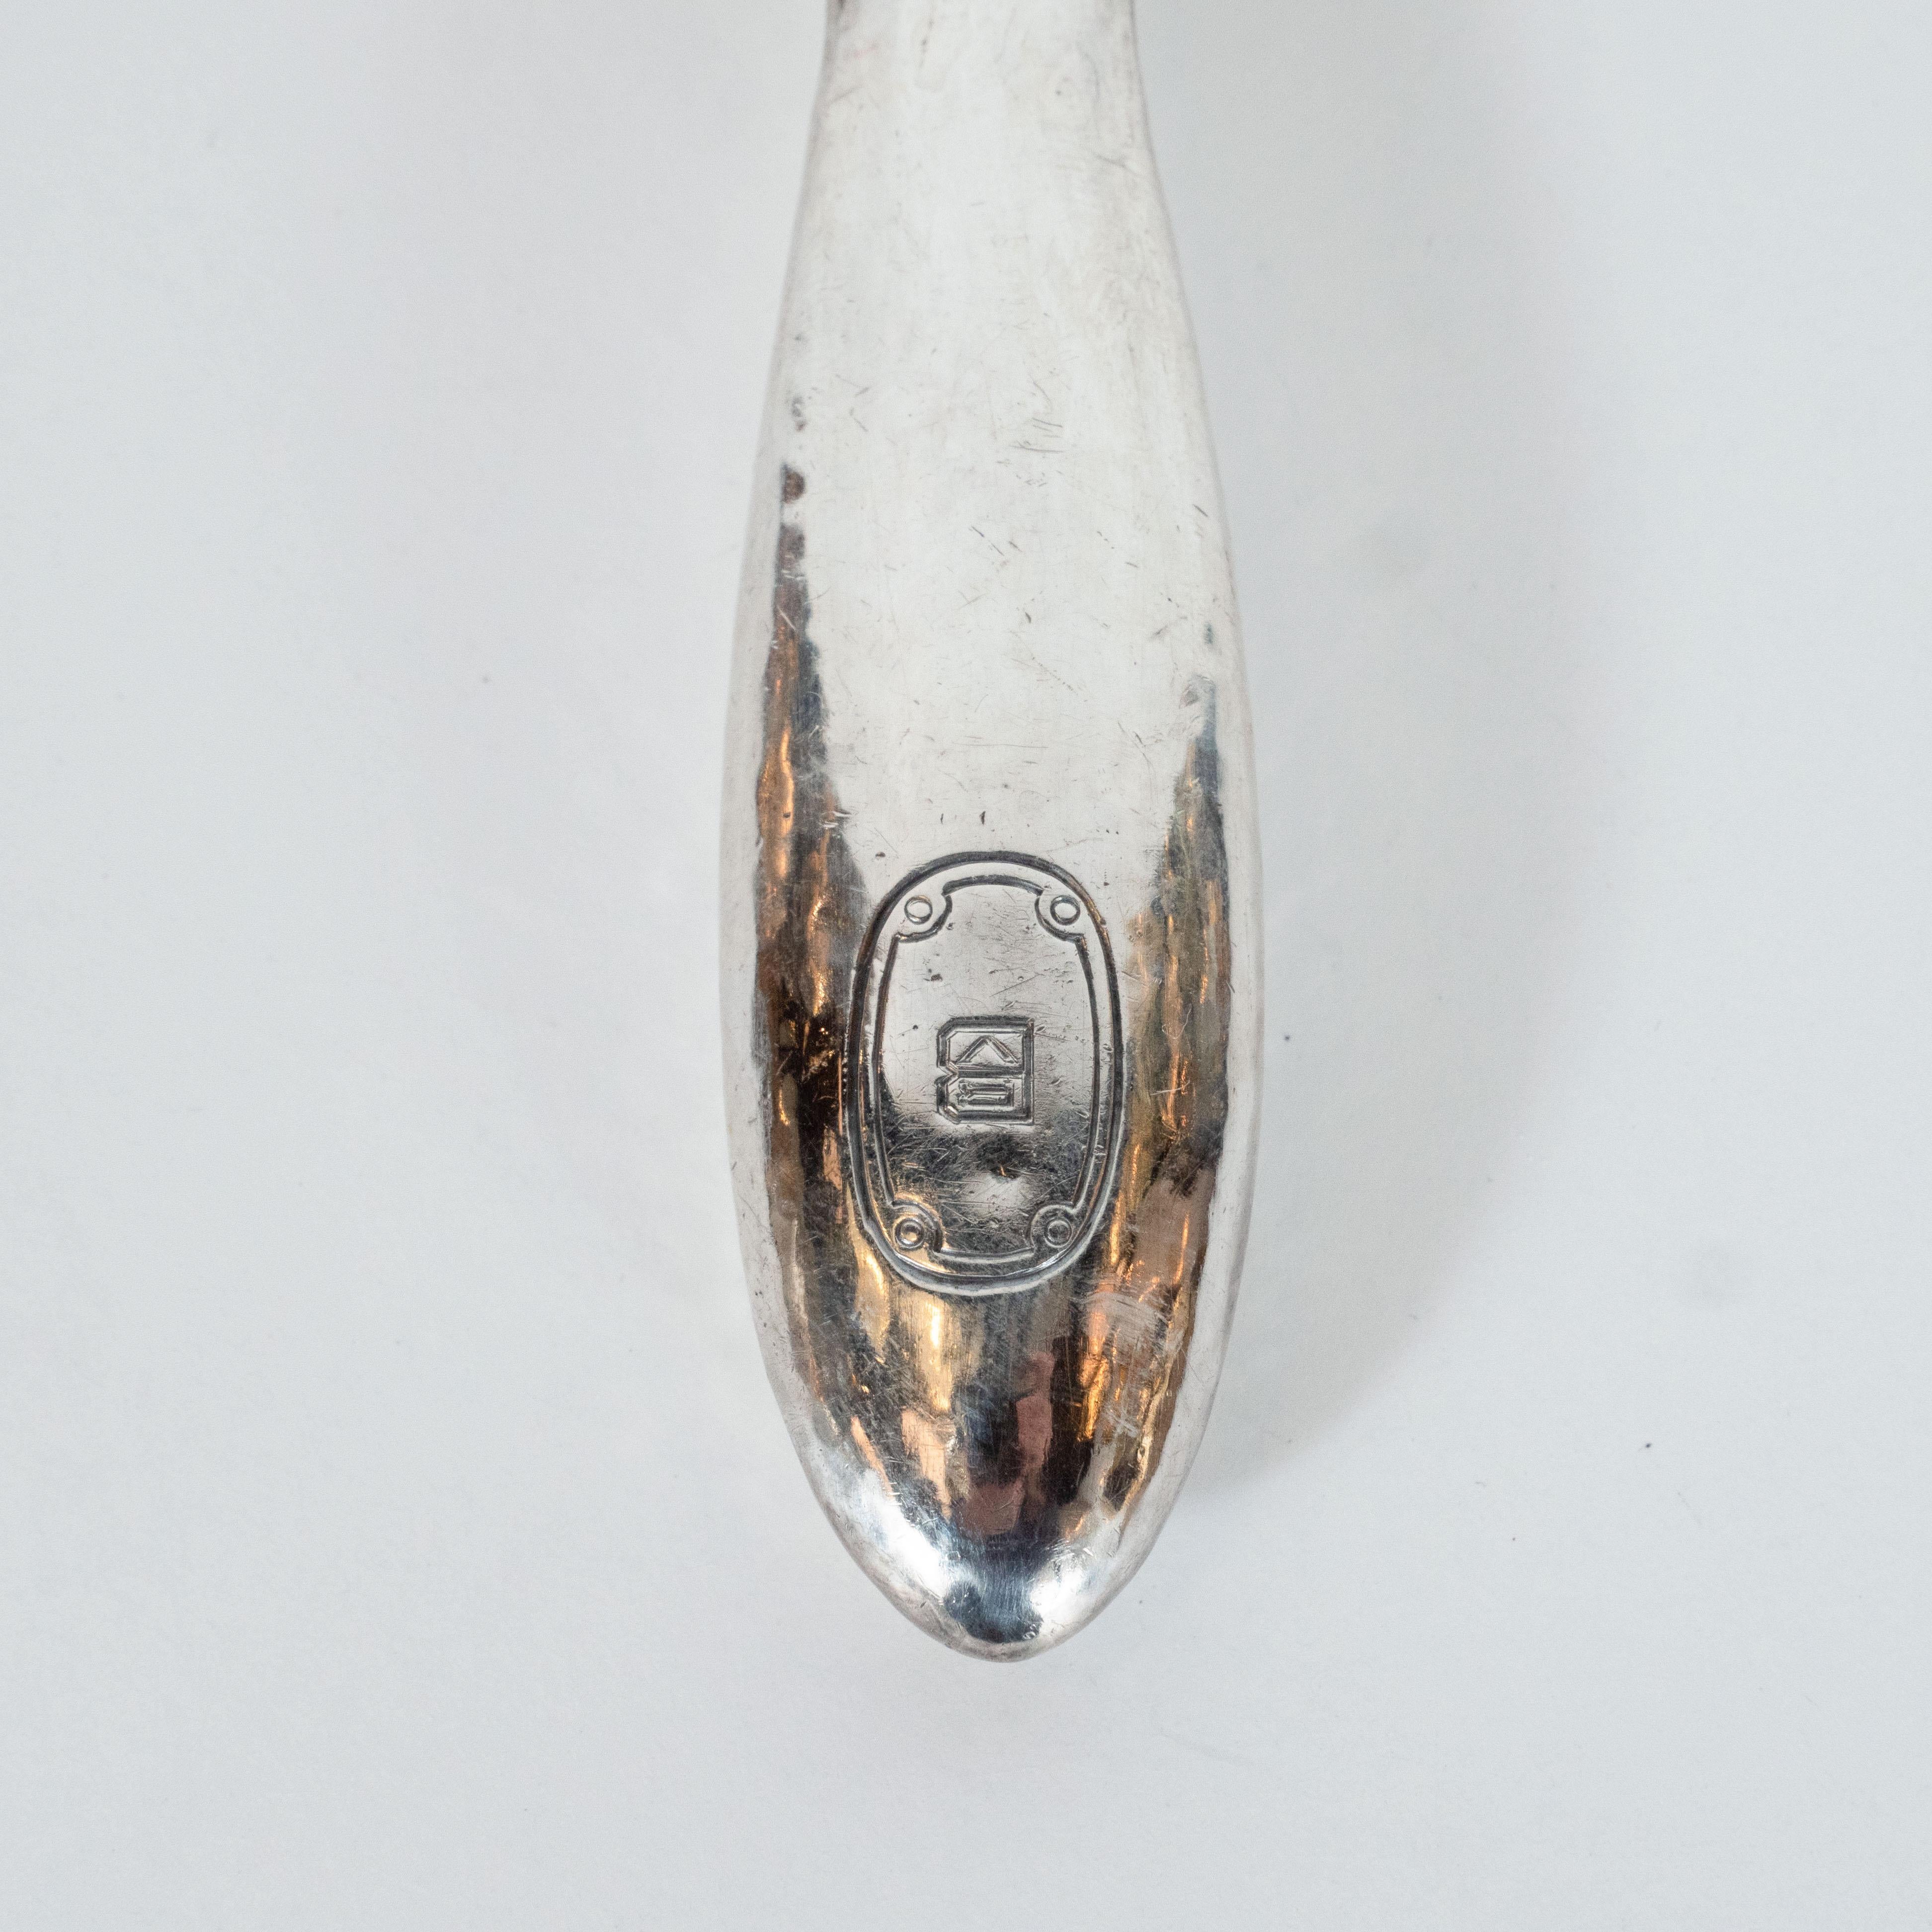 Early 20th Century Tiffany & Co. Antique Art Nouveau Hand Wrought/Hammered Sterling Silver Shoehorn